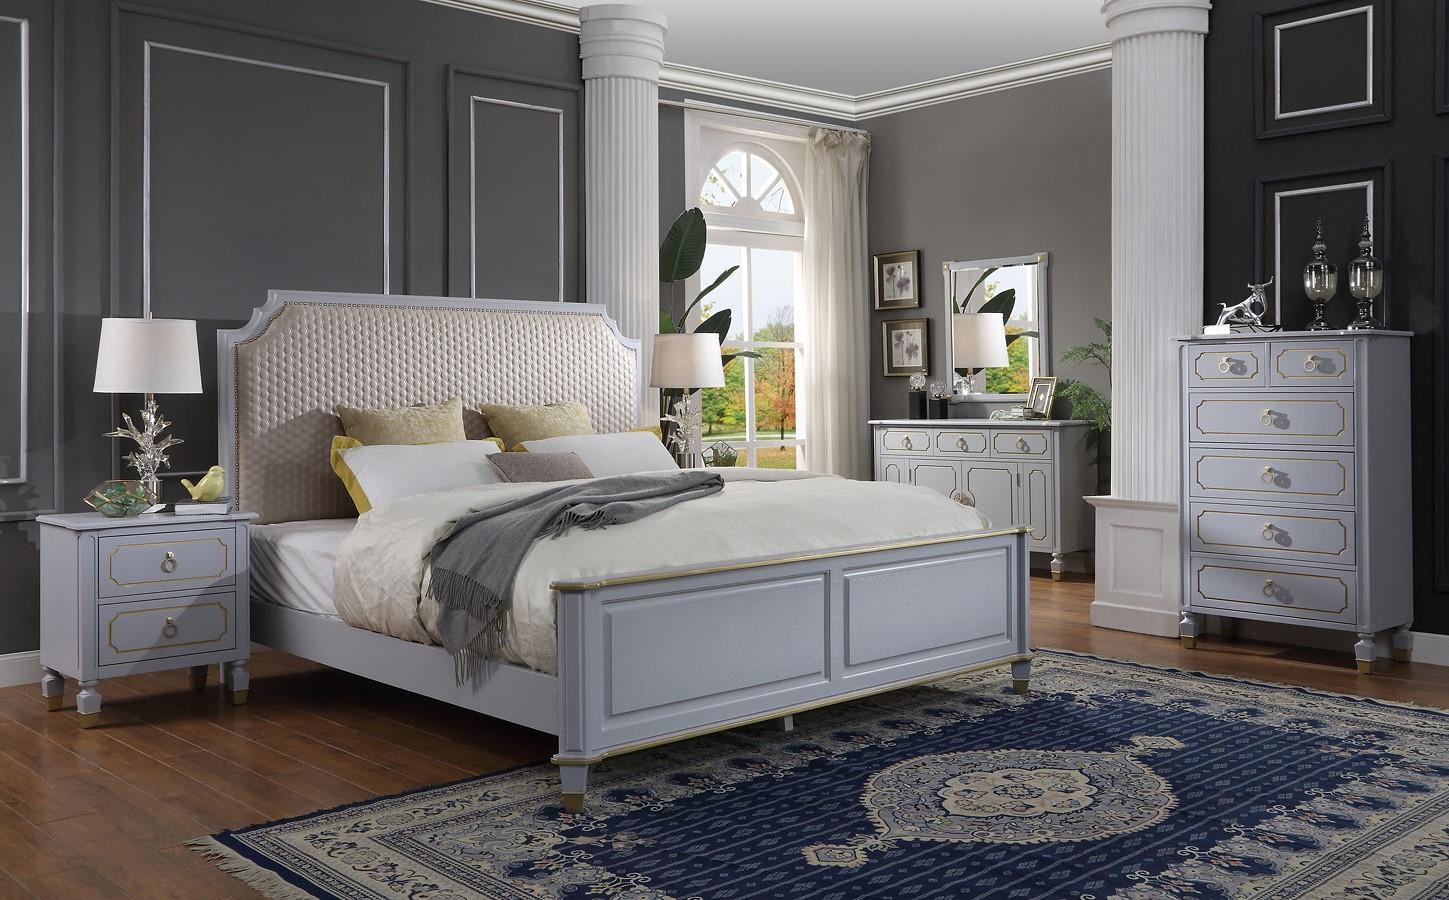 

    
Classic Beige & Gray California King 5pcs Bedroom Set by Acme House Marchese 28874CK-5pcs
